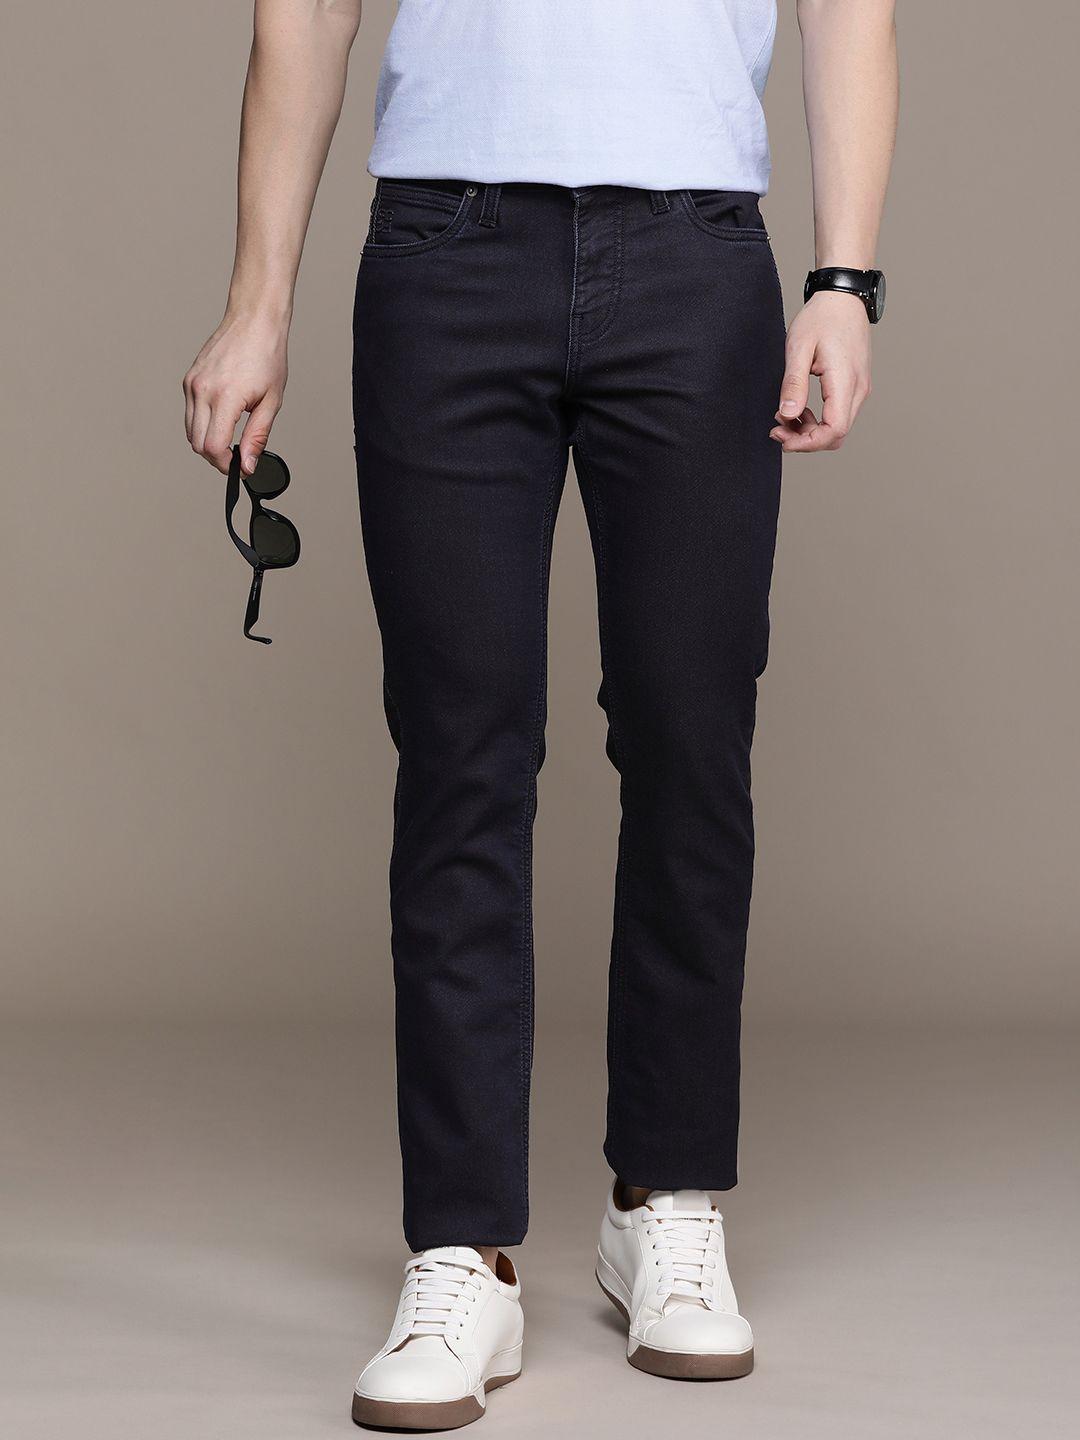 french connection men stretchable jeans